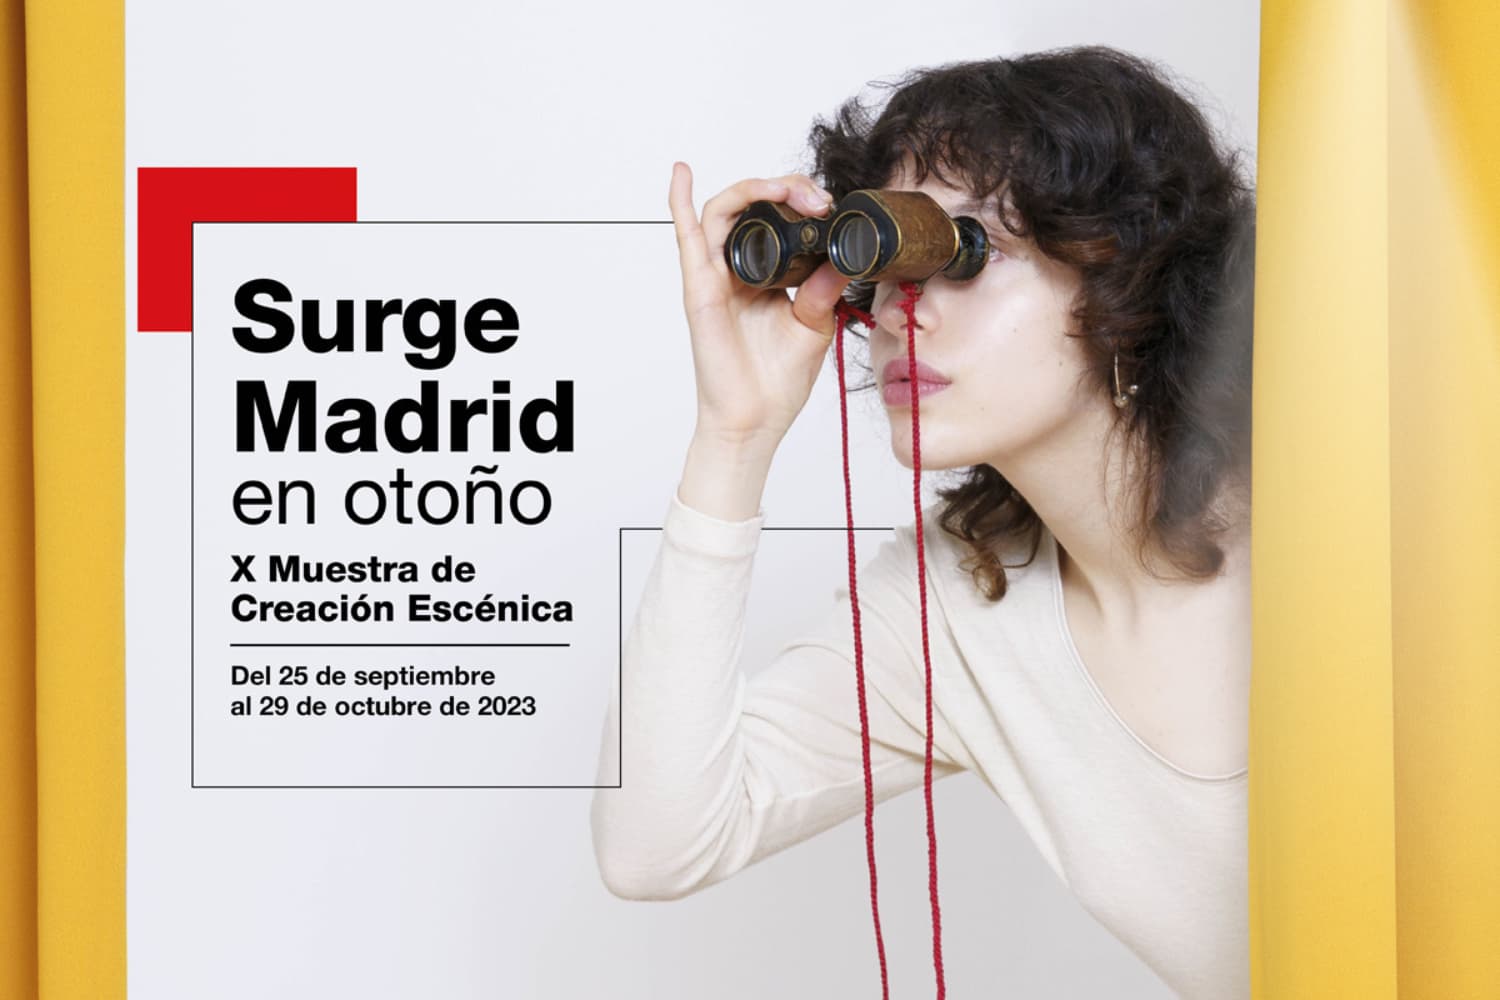 Music, theater, dance and performances at the 10th edition of Surge Madrid